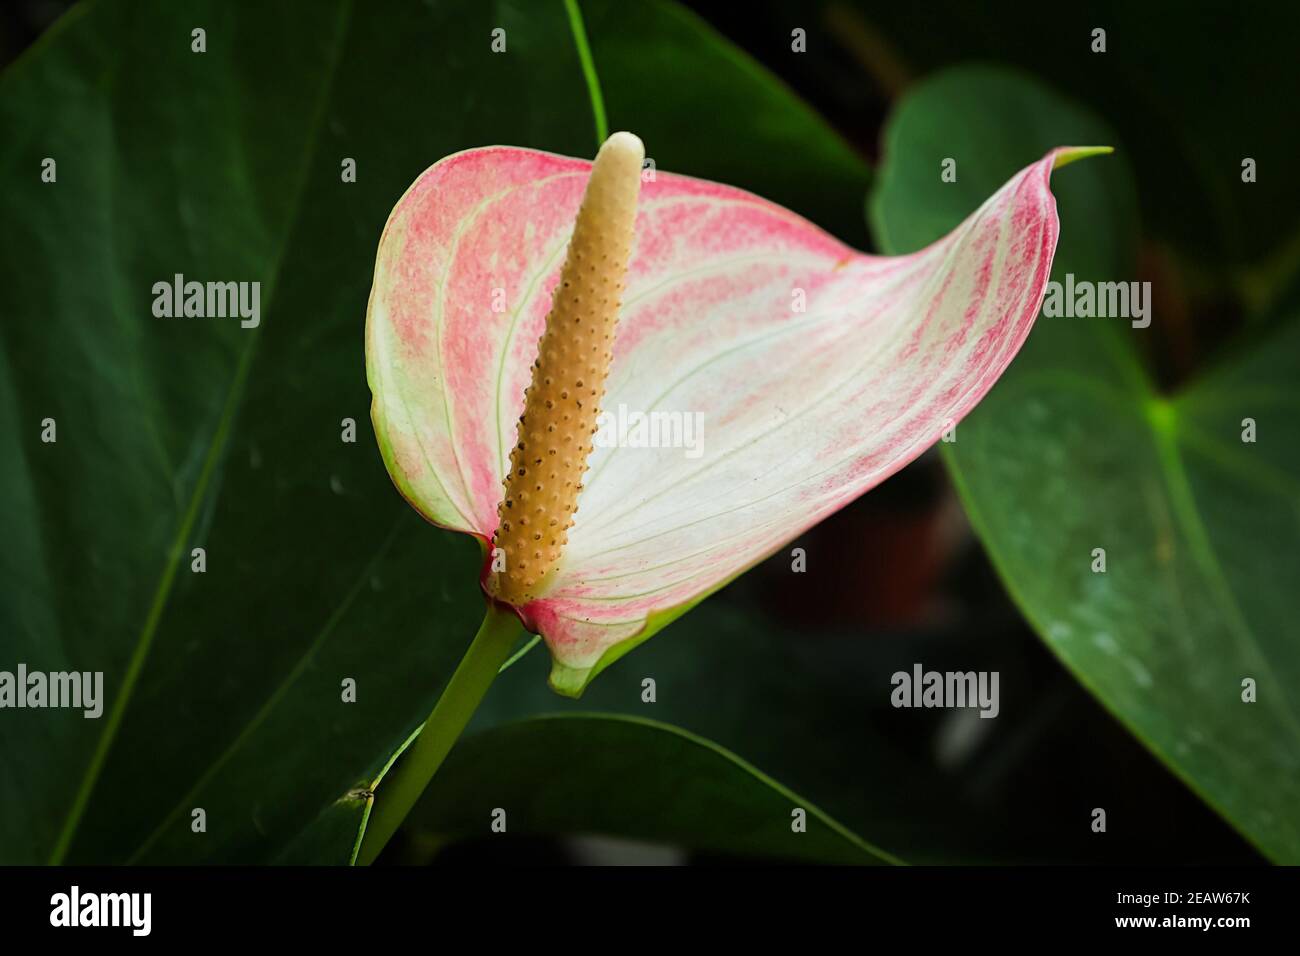 A pink and white anthurium against a dark green background Stock Photo